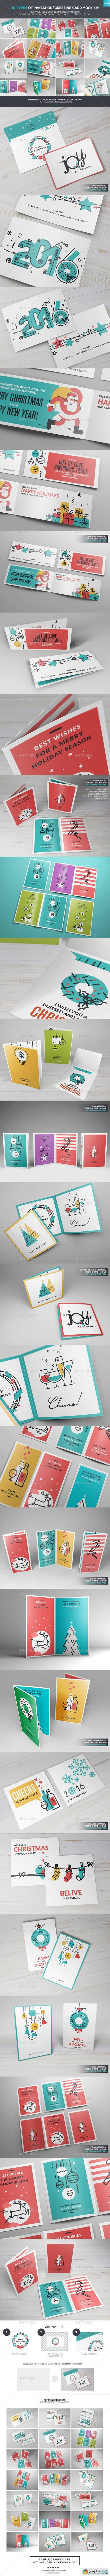 10 Types Of Invitation Greeting Card Mock-up